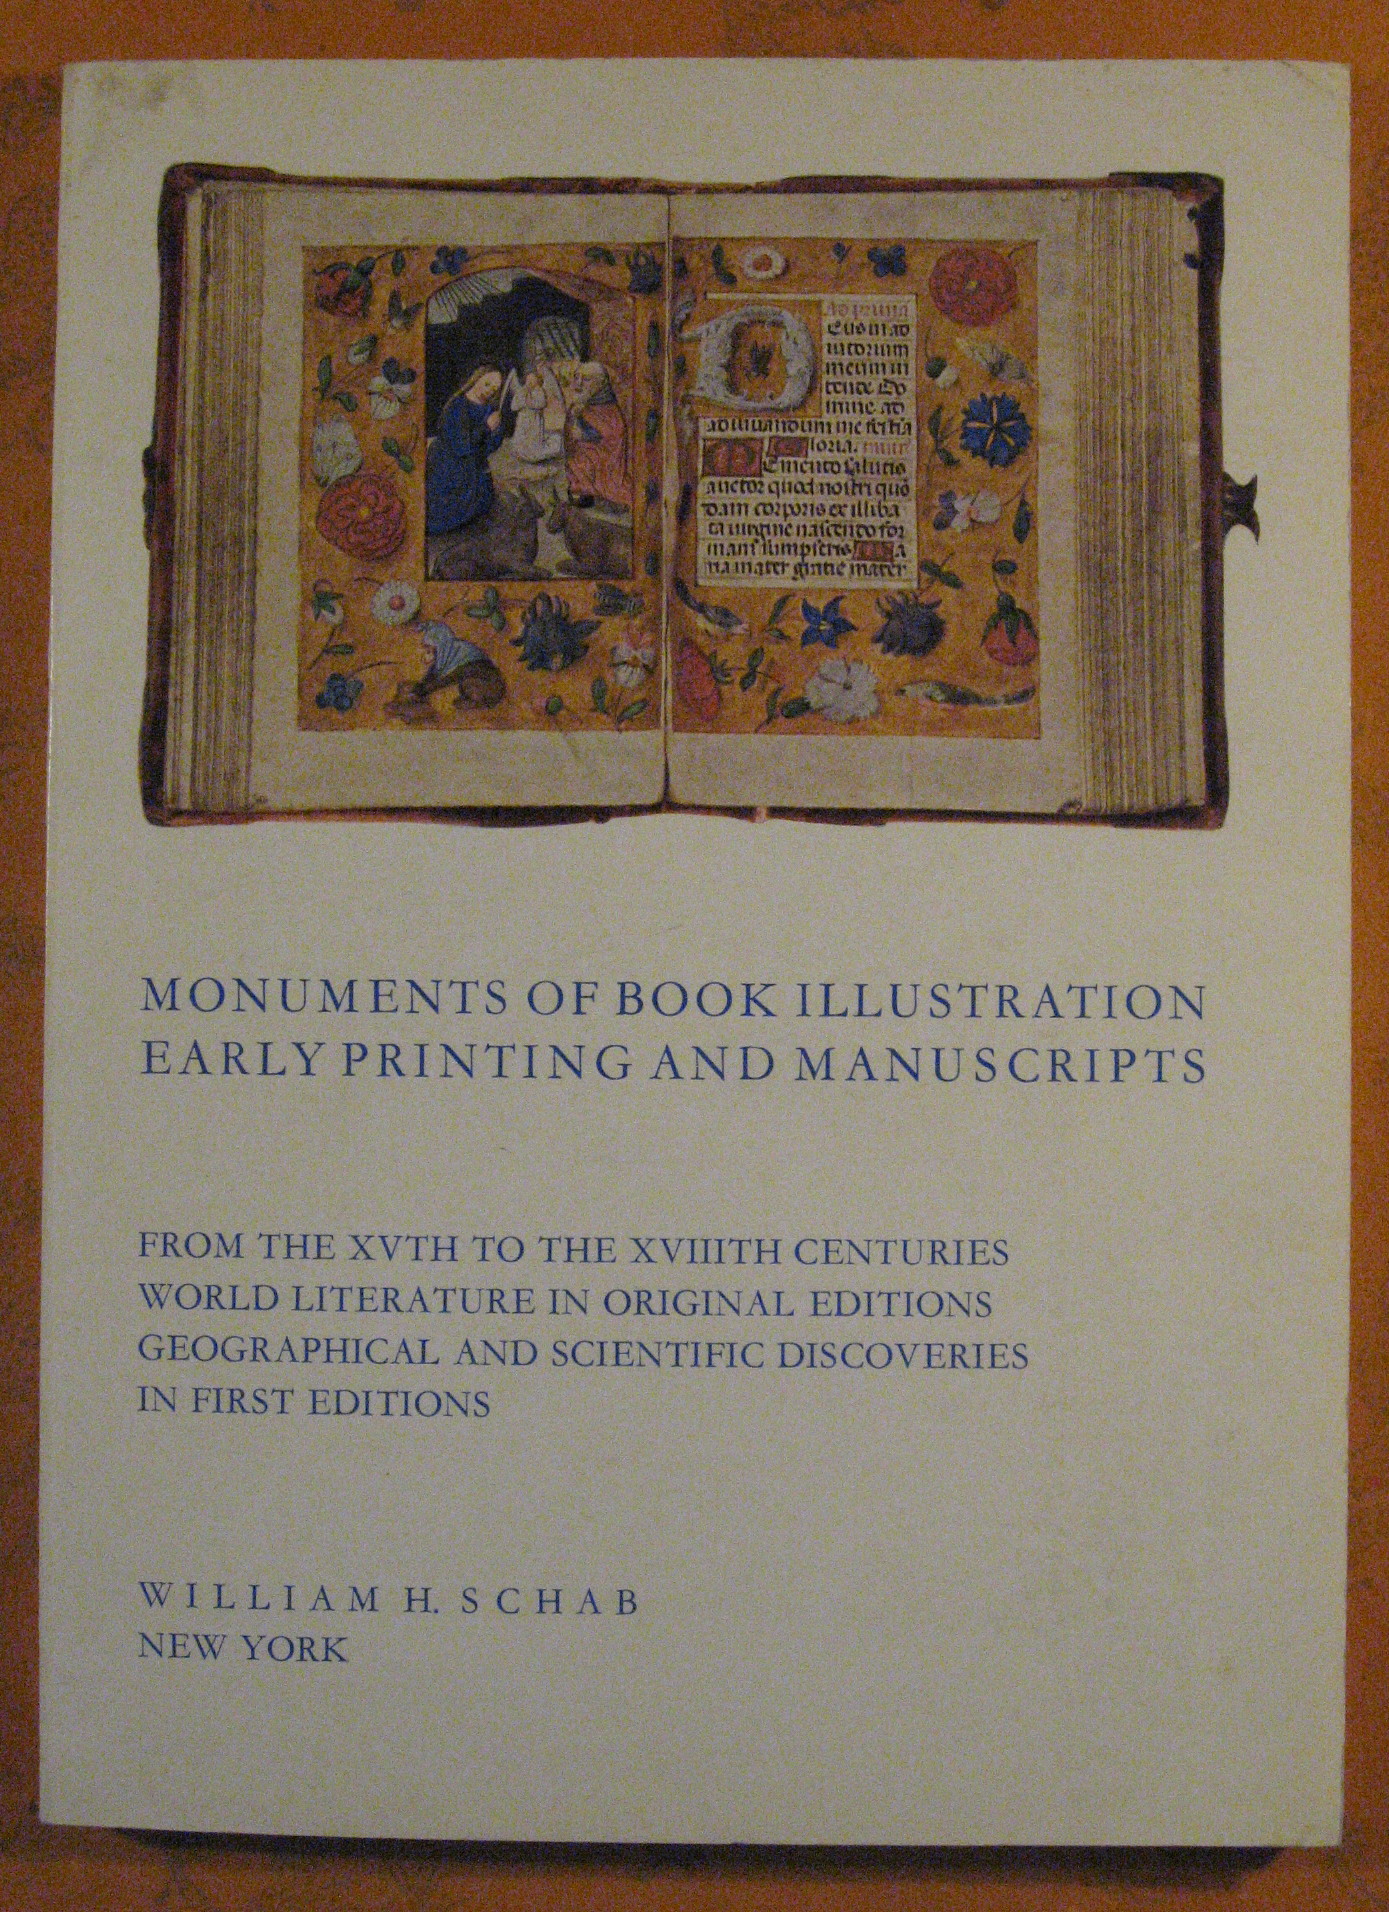 Image for Monuments of Book Illustration, Early Printing and Manuscripts: From the XVth to the XVIIIth Centuries World Literature in Original Editions, Geographical and Scientific Discoveries in First Editions: Catalogue 27